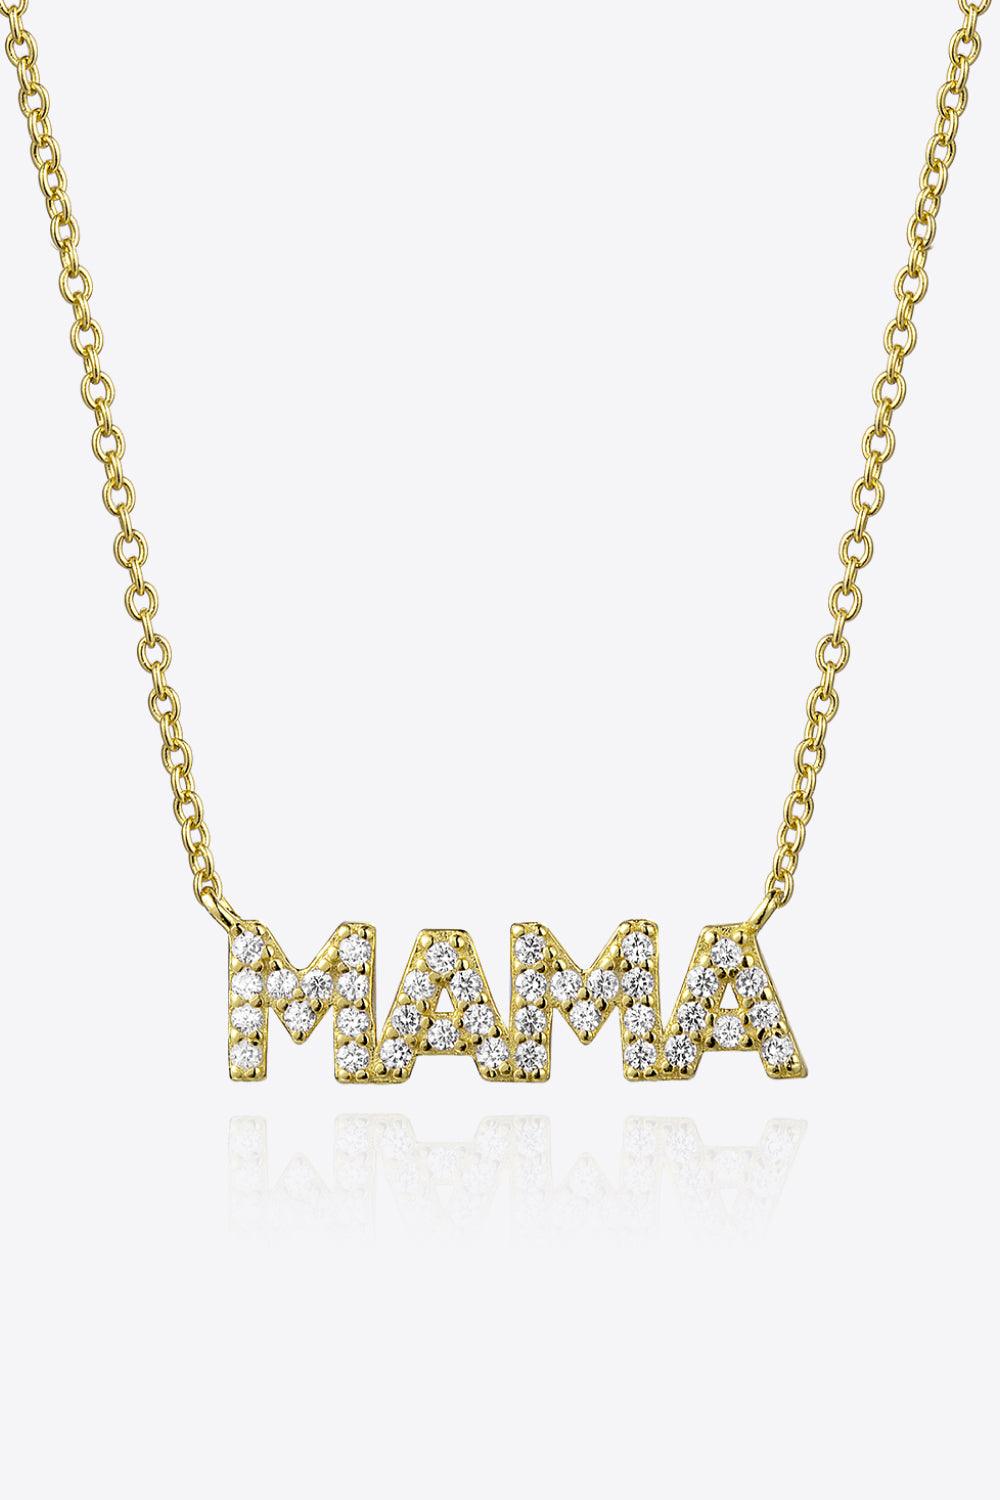 MAMA Zircon 925 Sterling Silver Necklace - God's Girl Gifts And Apparel